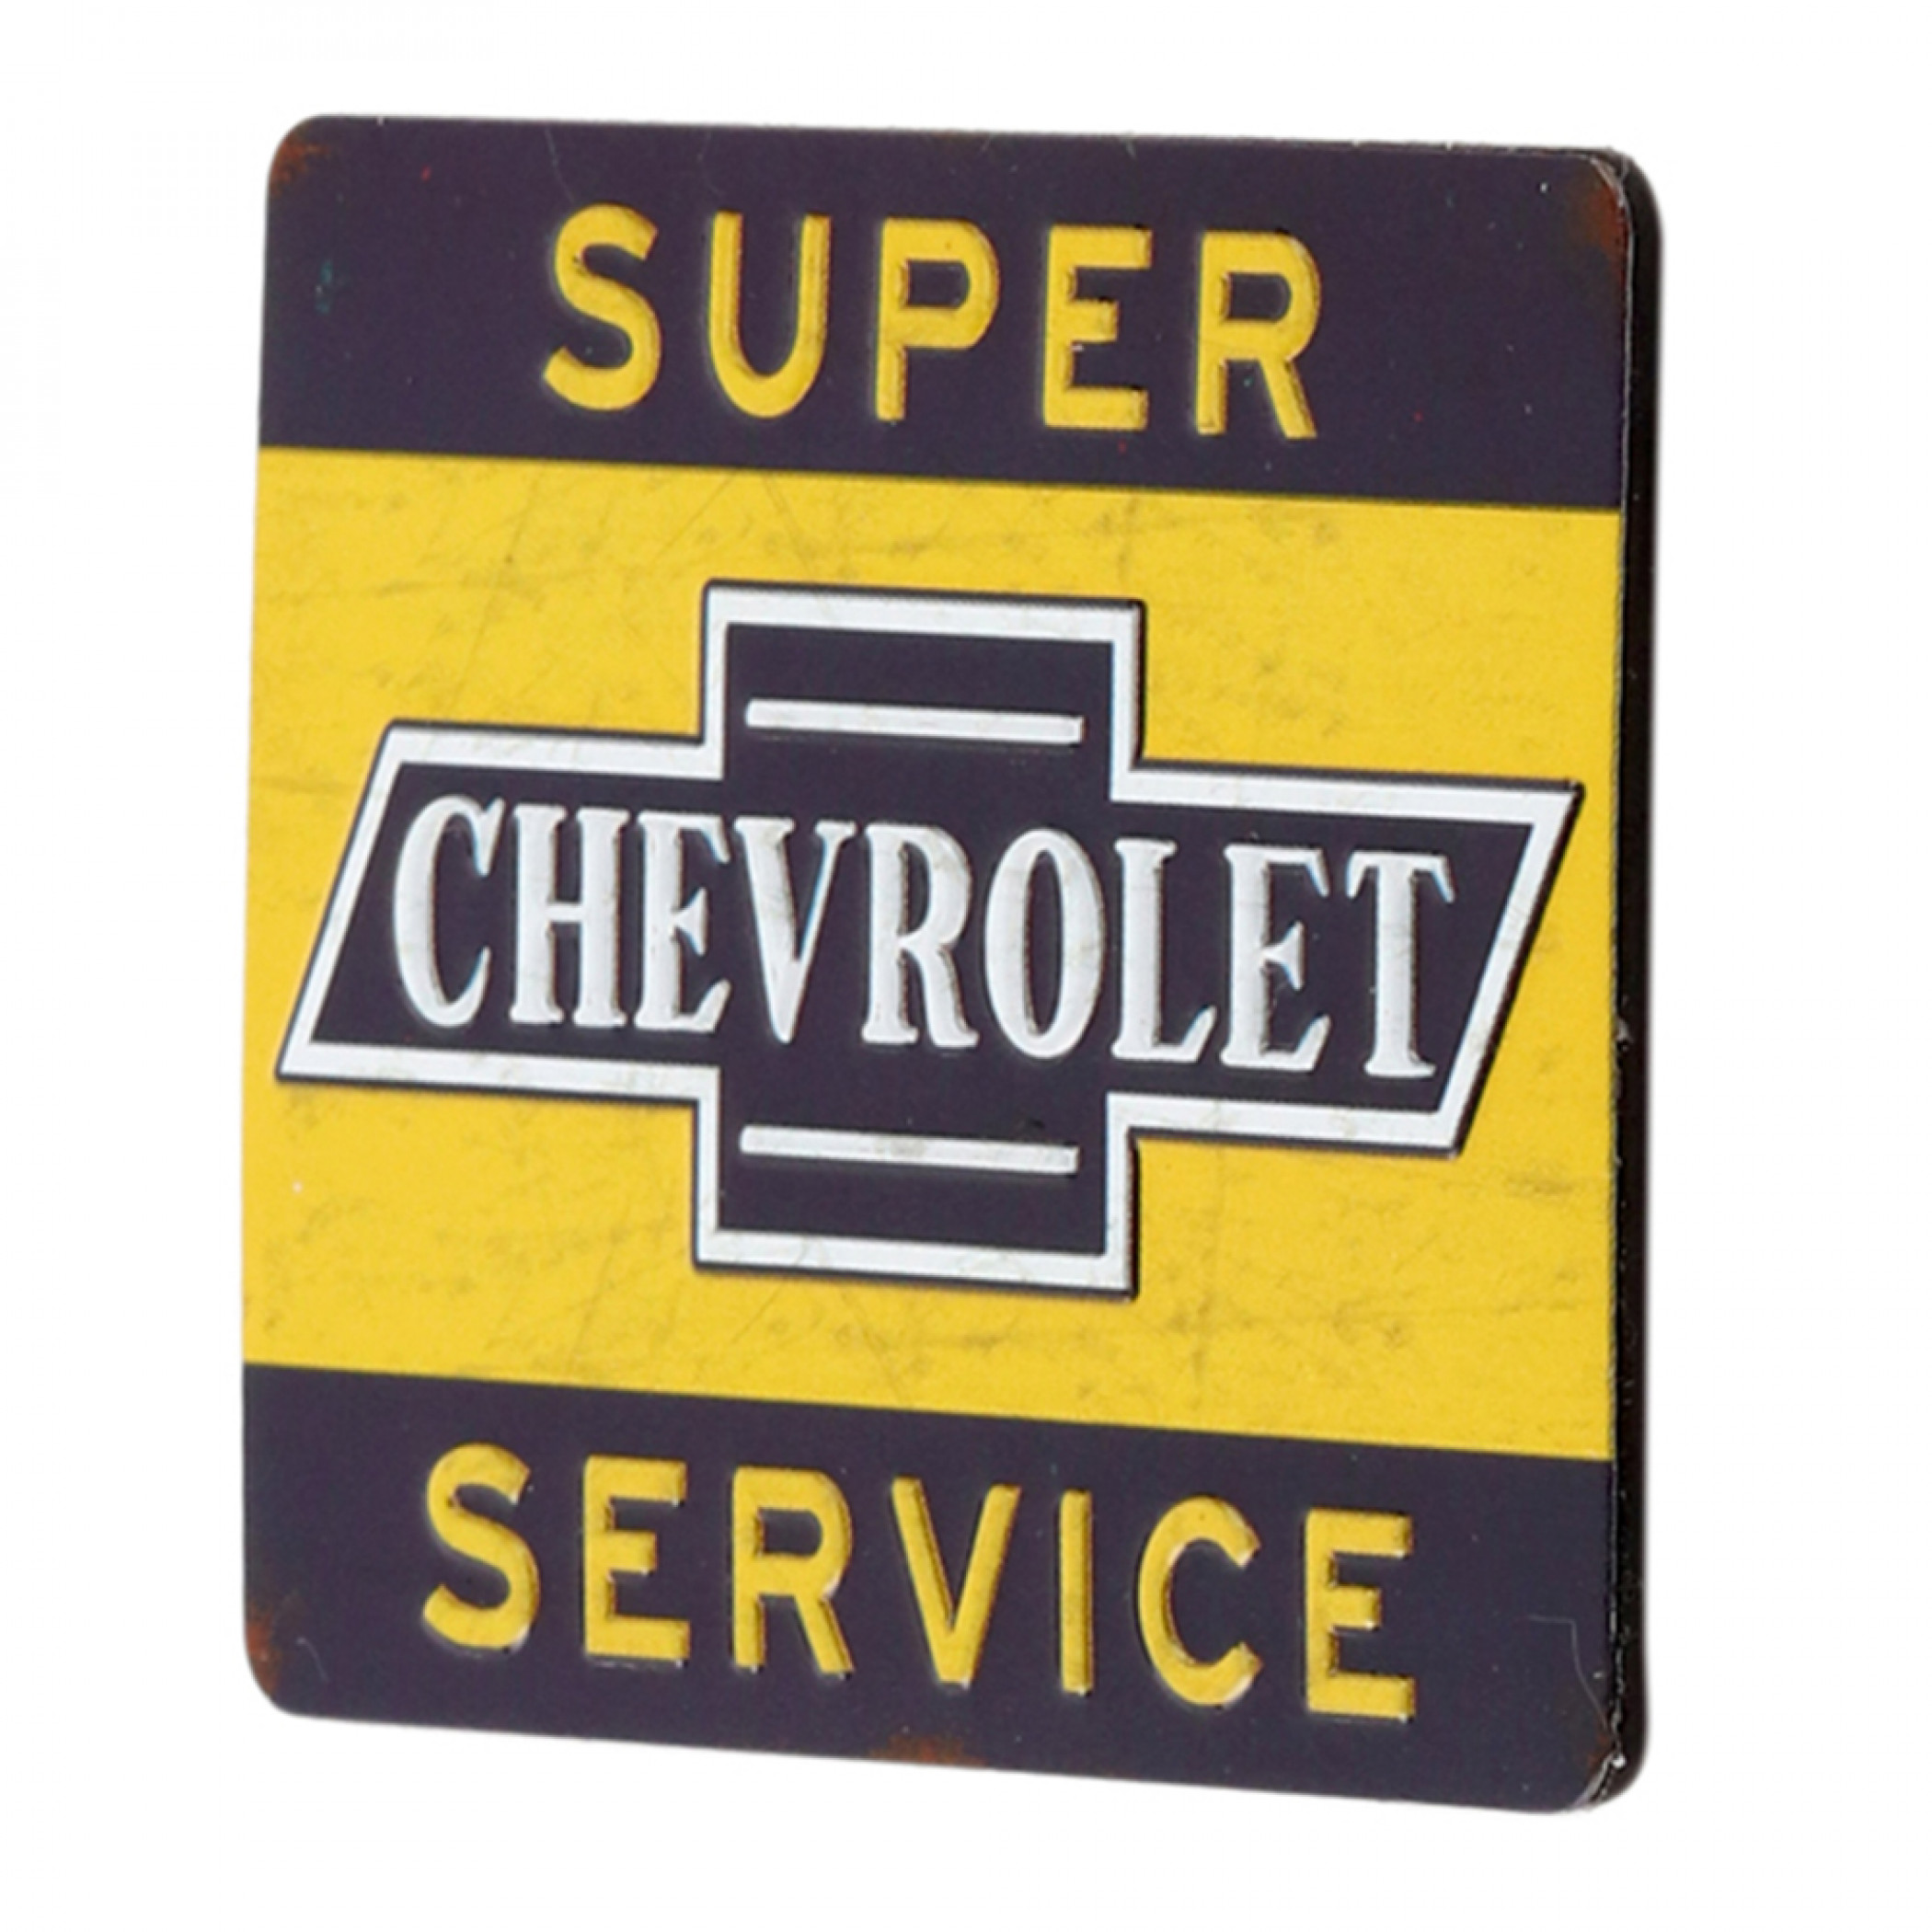 Chevrolet Super Service Rustic Sign Styled Embossed Tin Magnet